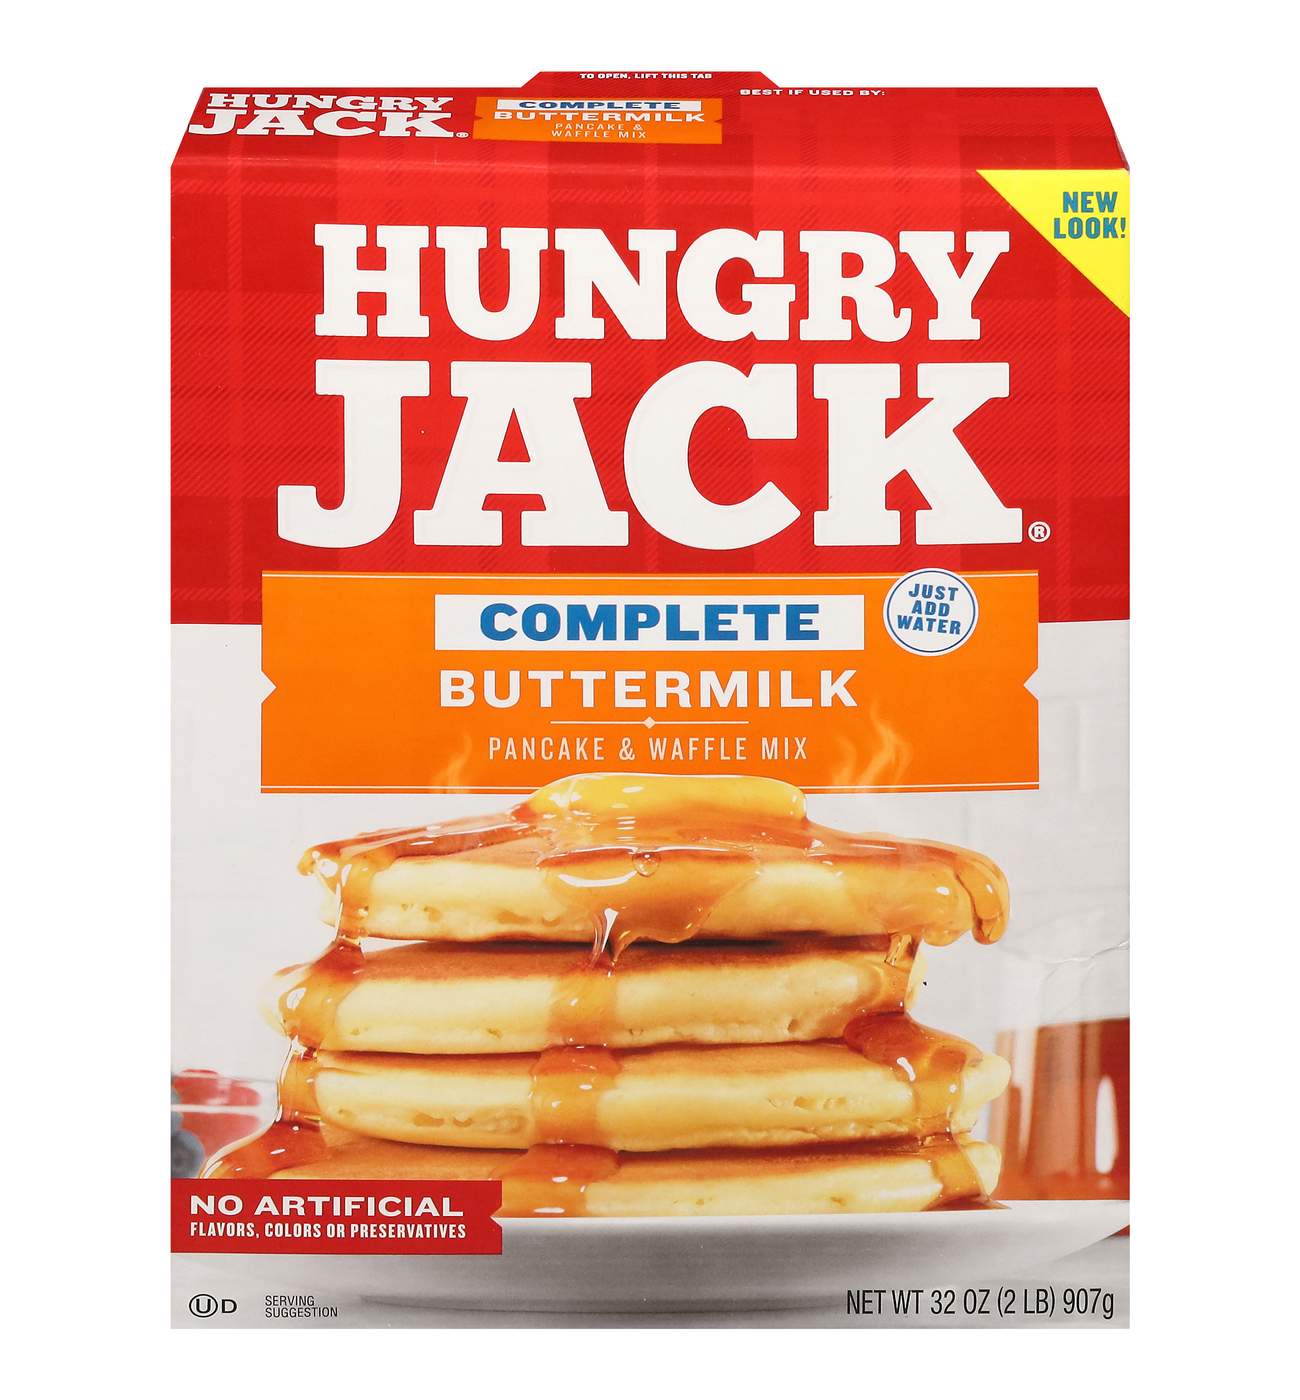 Hungry Jack Complete Buttermilk Pancake & Waffle Mix; image 1 of 5